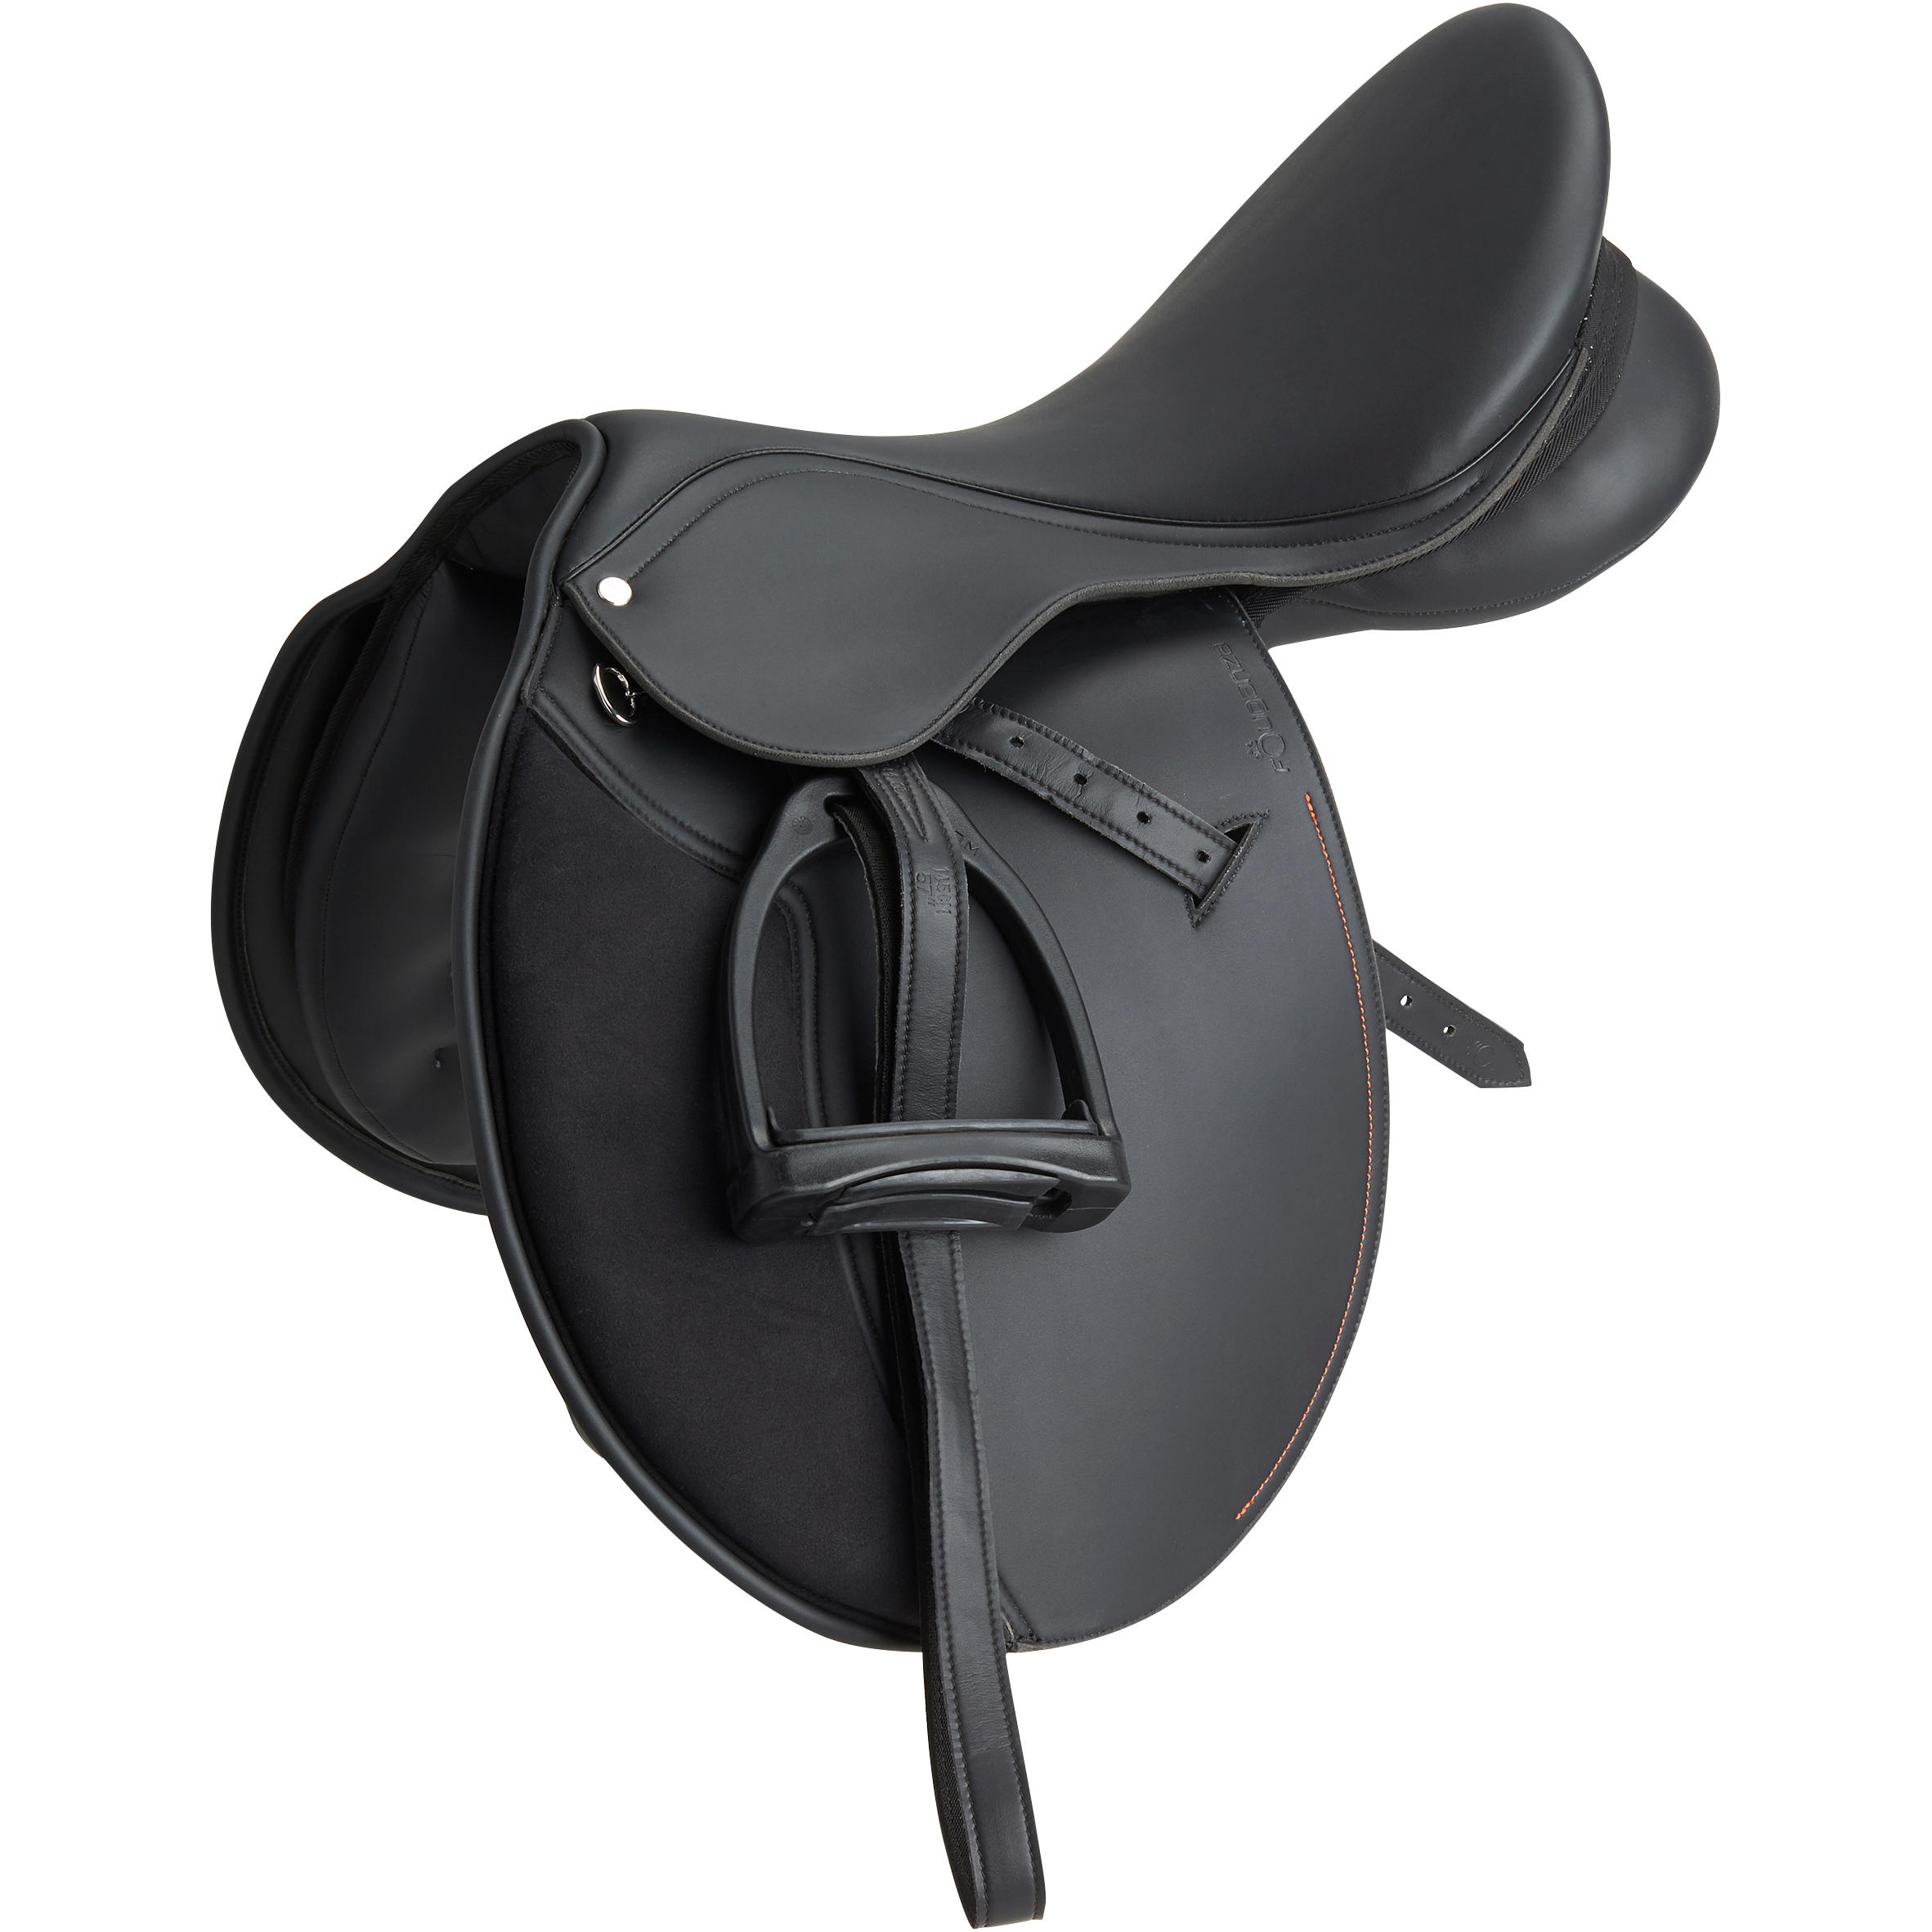 16,17 & 18 SYNTHETIC LEATHER ALL PURPOSE HORSE RIDING SADDLE BLACK COLOUR 14,15 